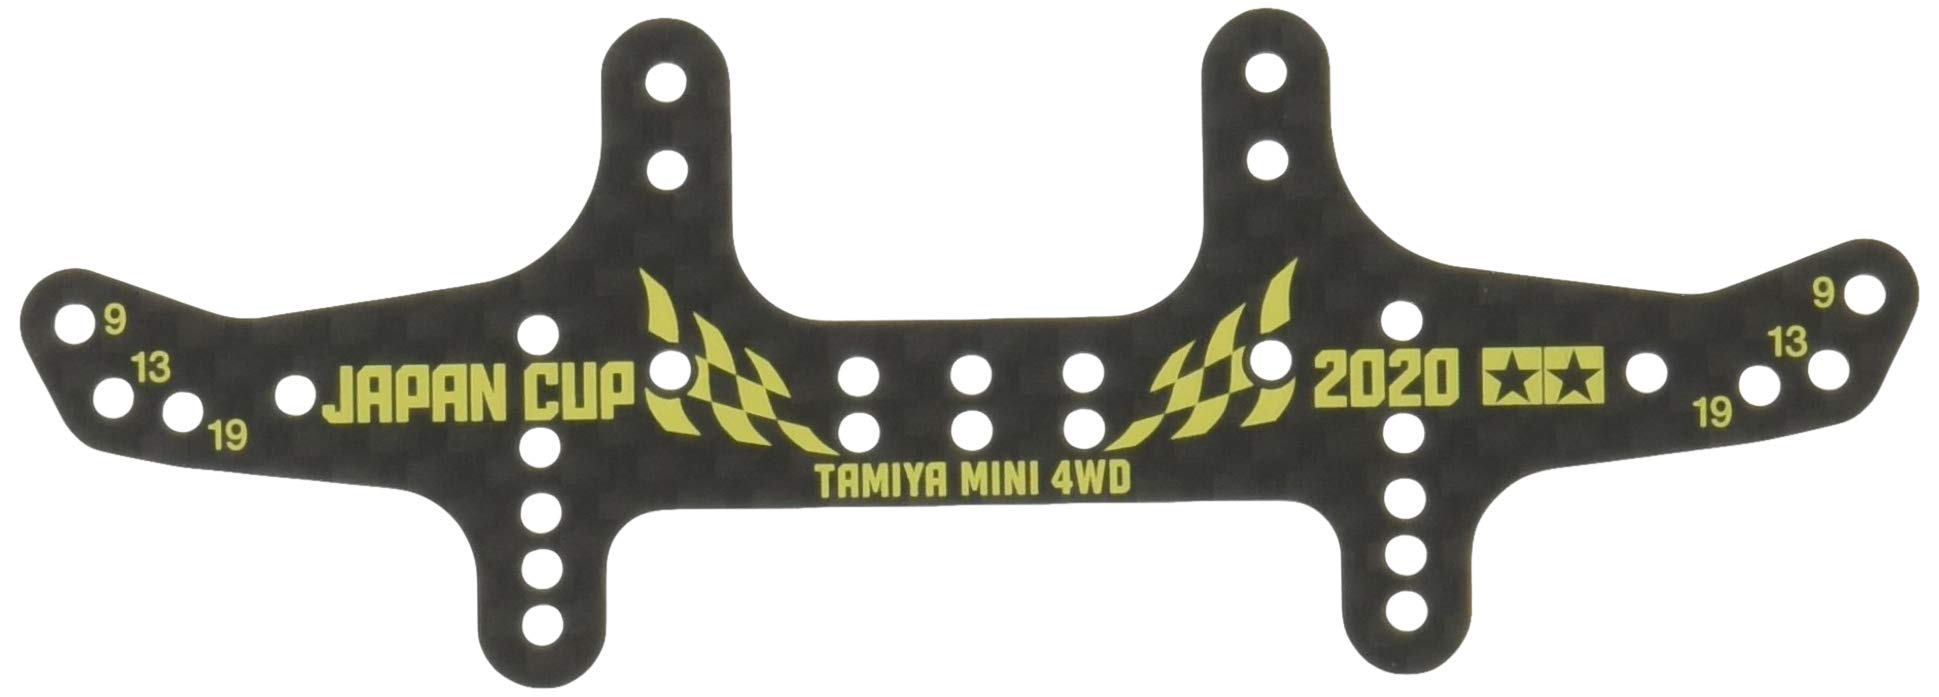 TAMIYA 95132 Mini 4Wd Hg Carbone Arrière Multi Roller Setting Stay 1.5Mm J-Cup 2020